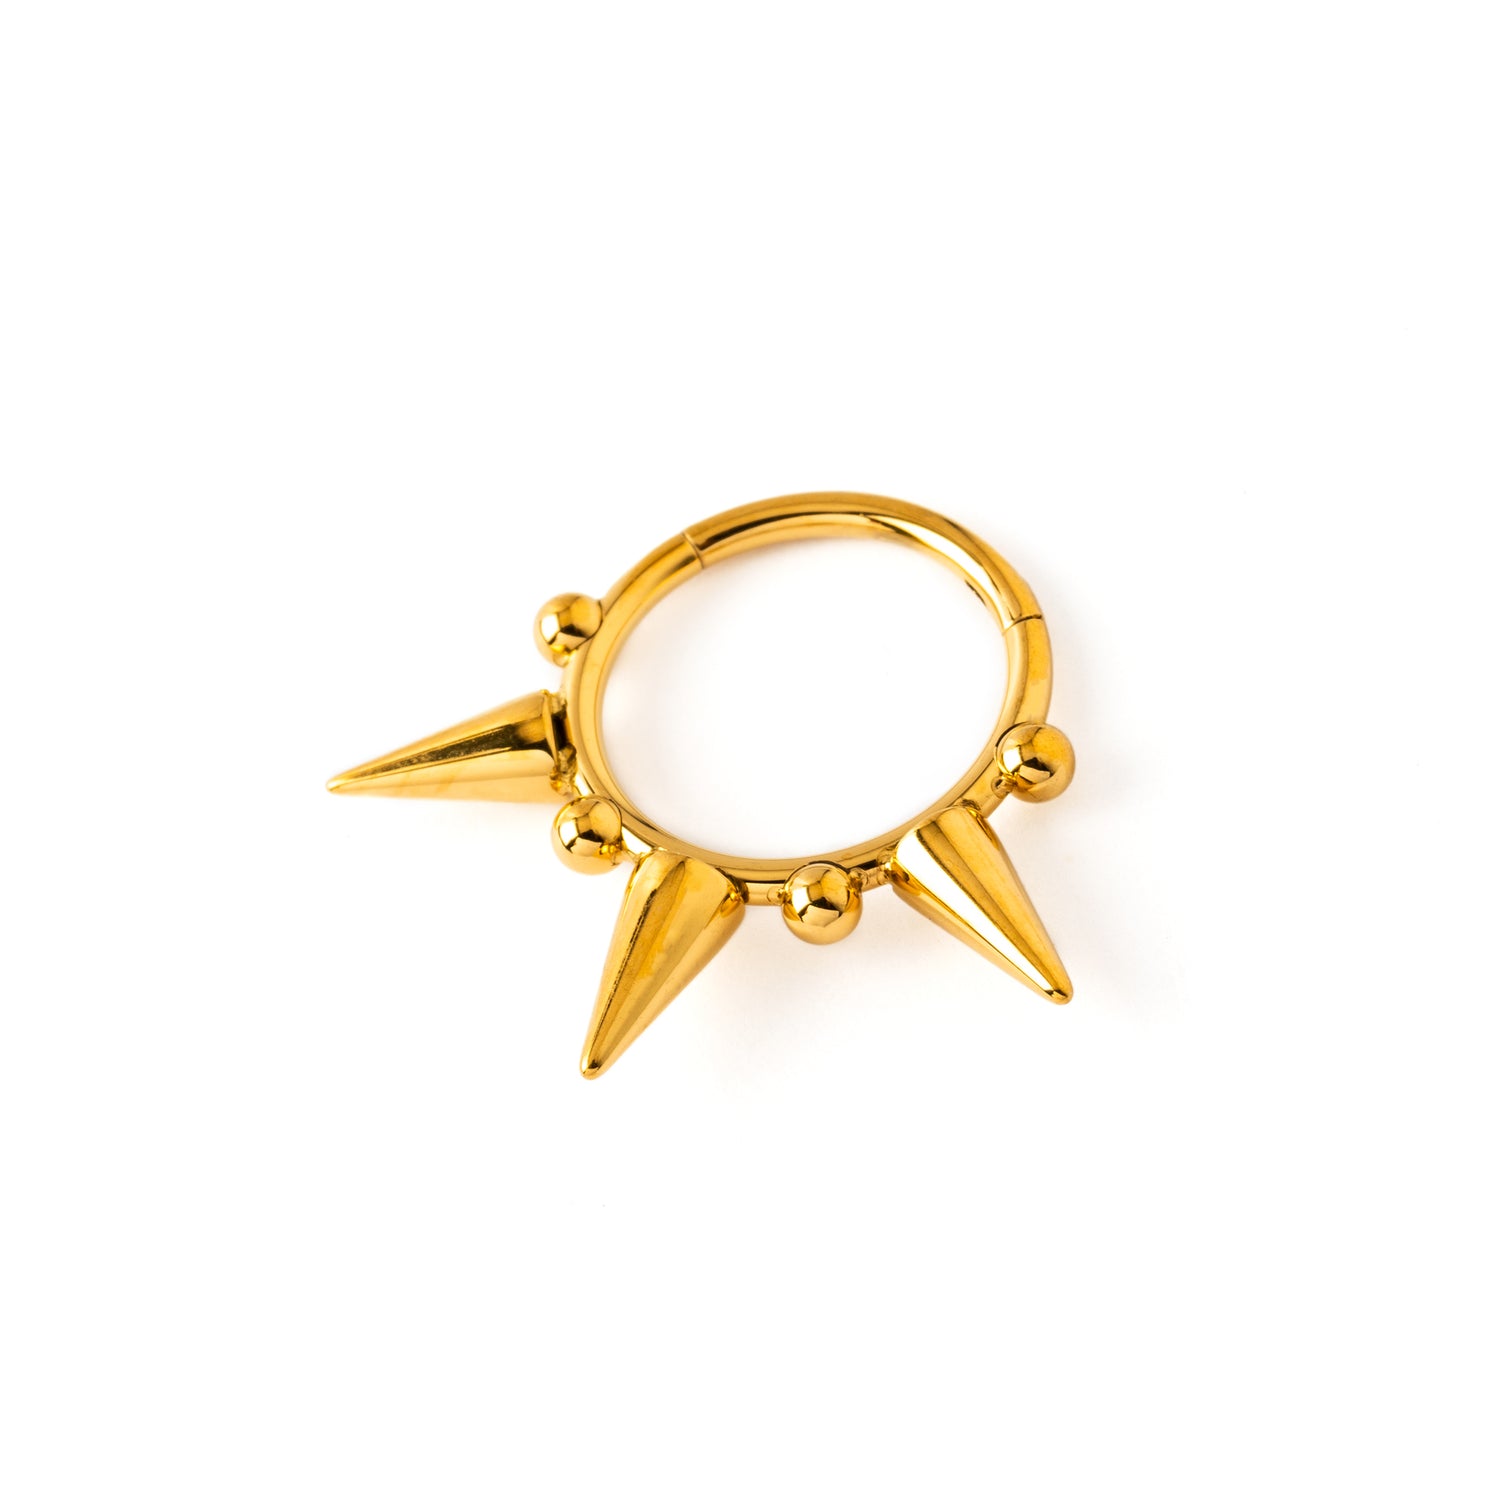 Golden surgical steel Spikes Septum Clicker ring right side view